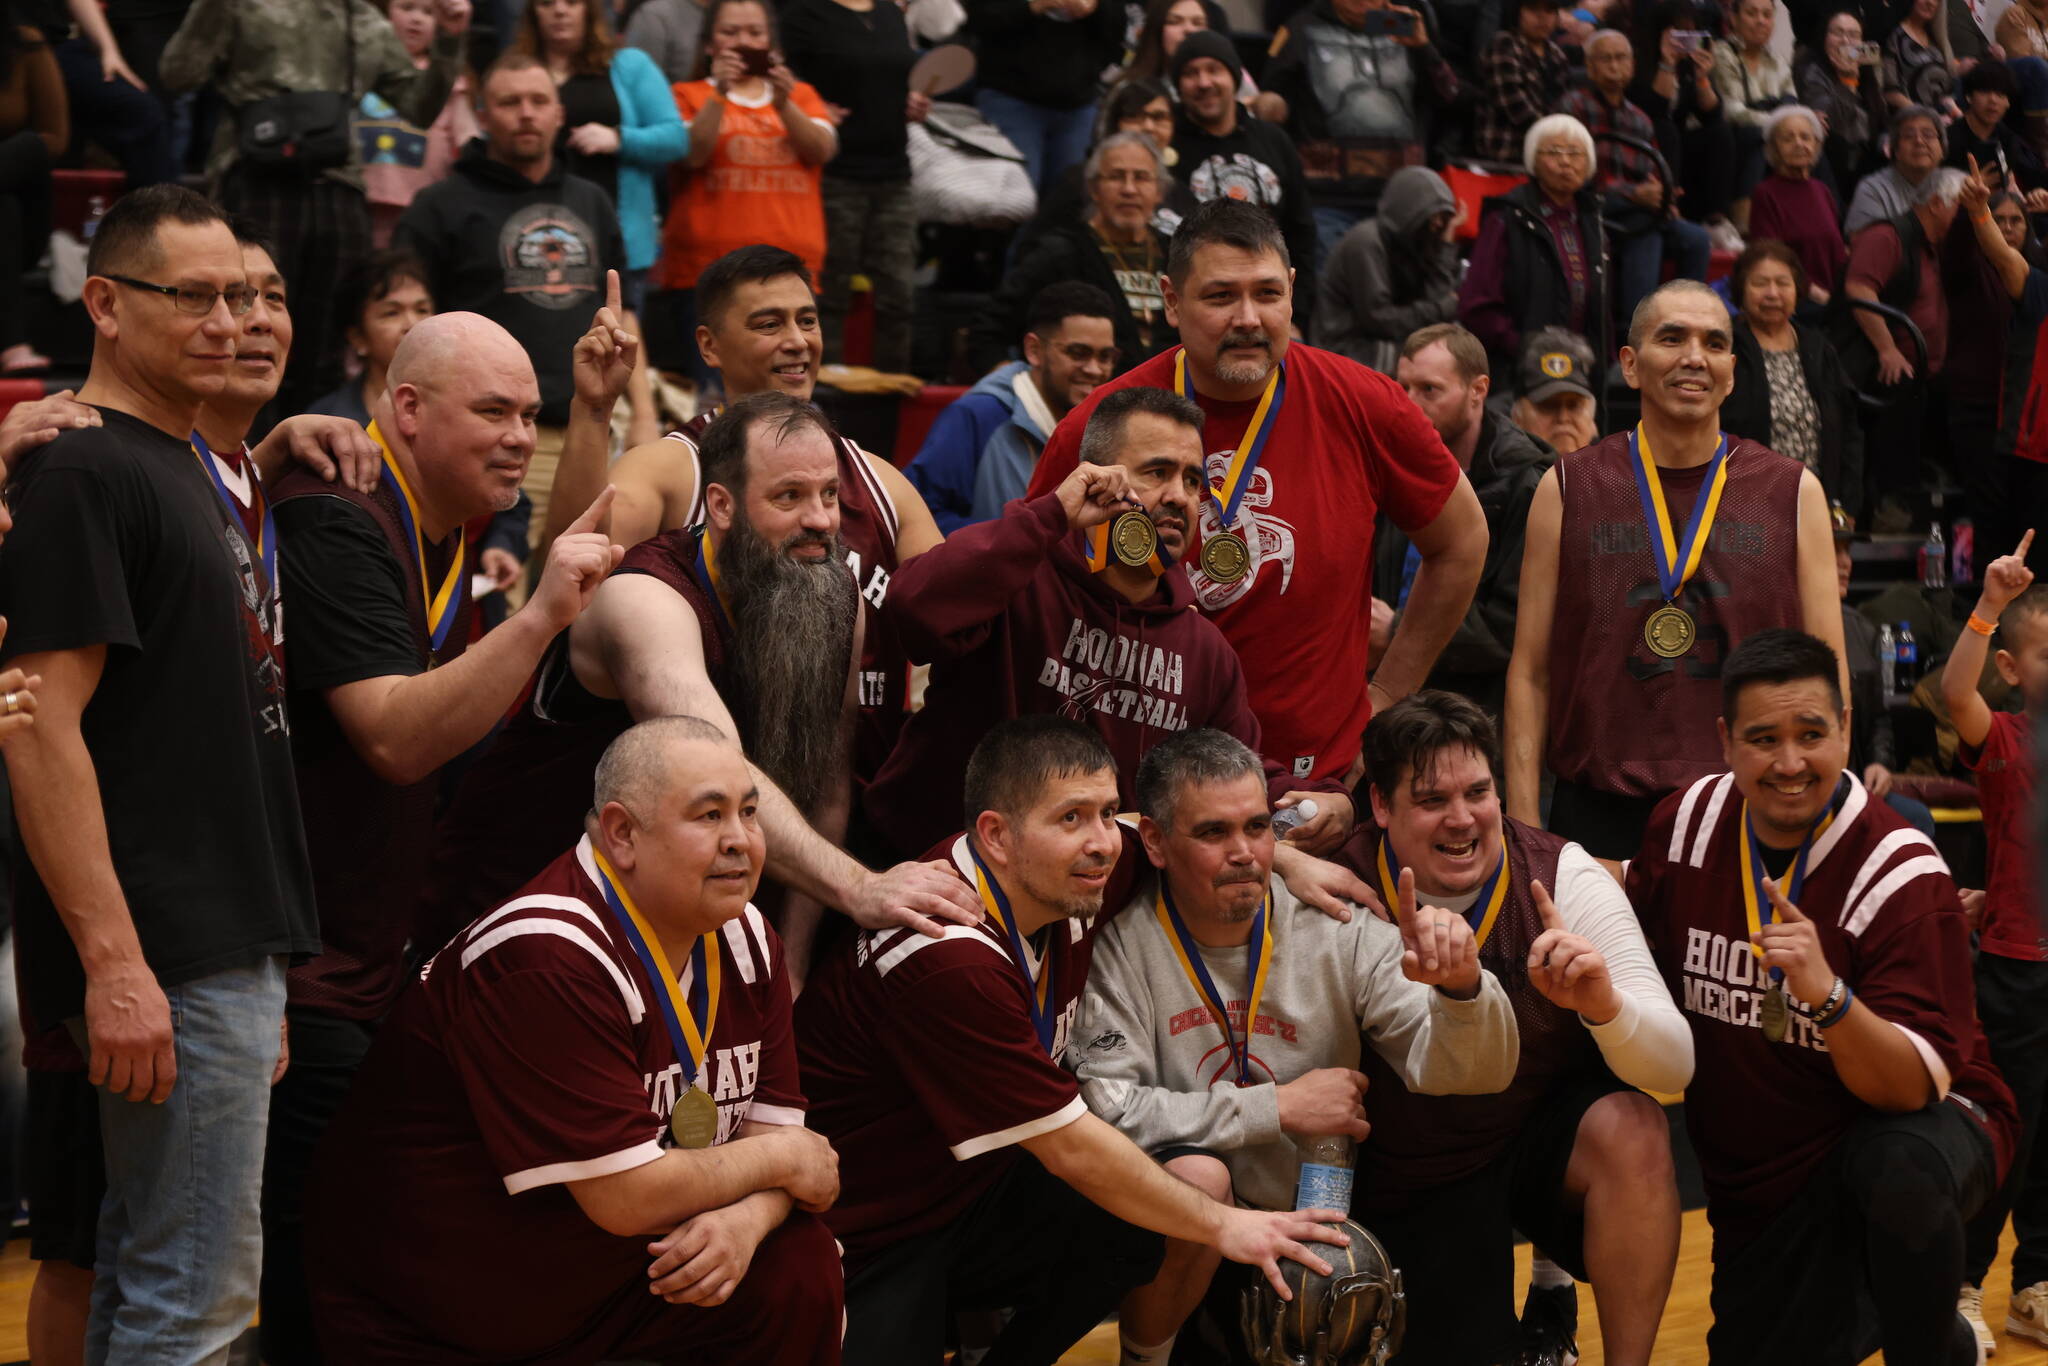 Hoonah’s Masters Bracket team poses for a group photo on Saturday after being crowned this year’s champs for the M bracket in the Gold Medal Basketball Tournament at JDHS. (Ben Hohenstatt / Juneau Empire)